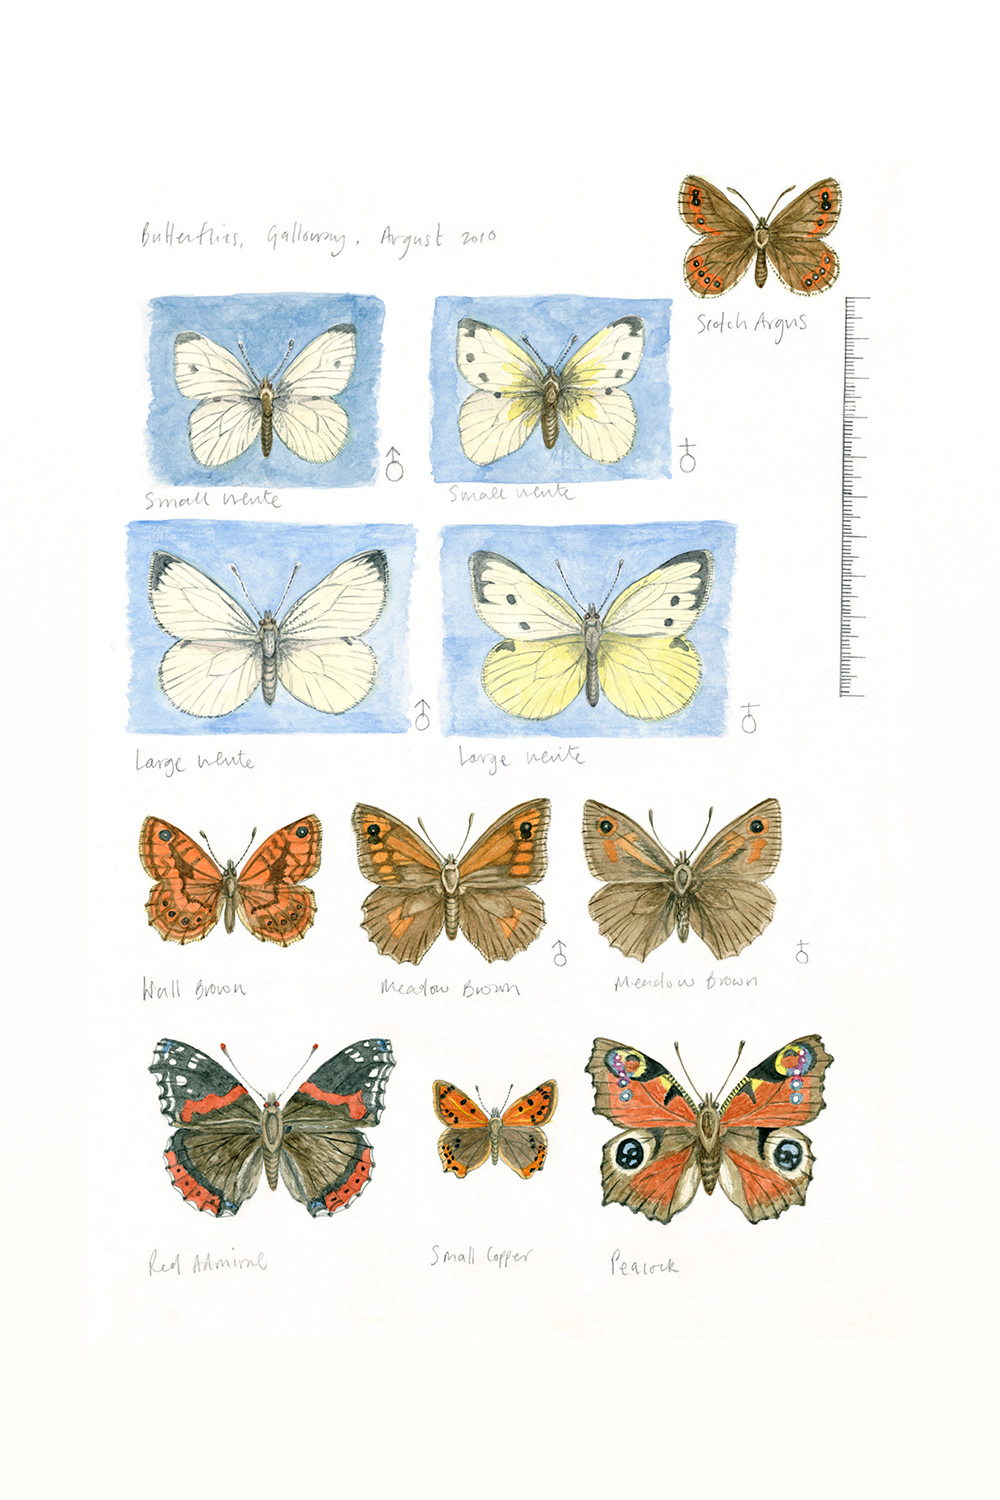 Butterflies, Galloway Estate (sketchbook page), 2010, watercolour and pencil on paper